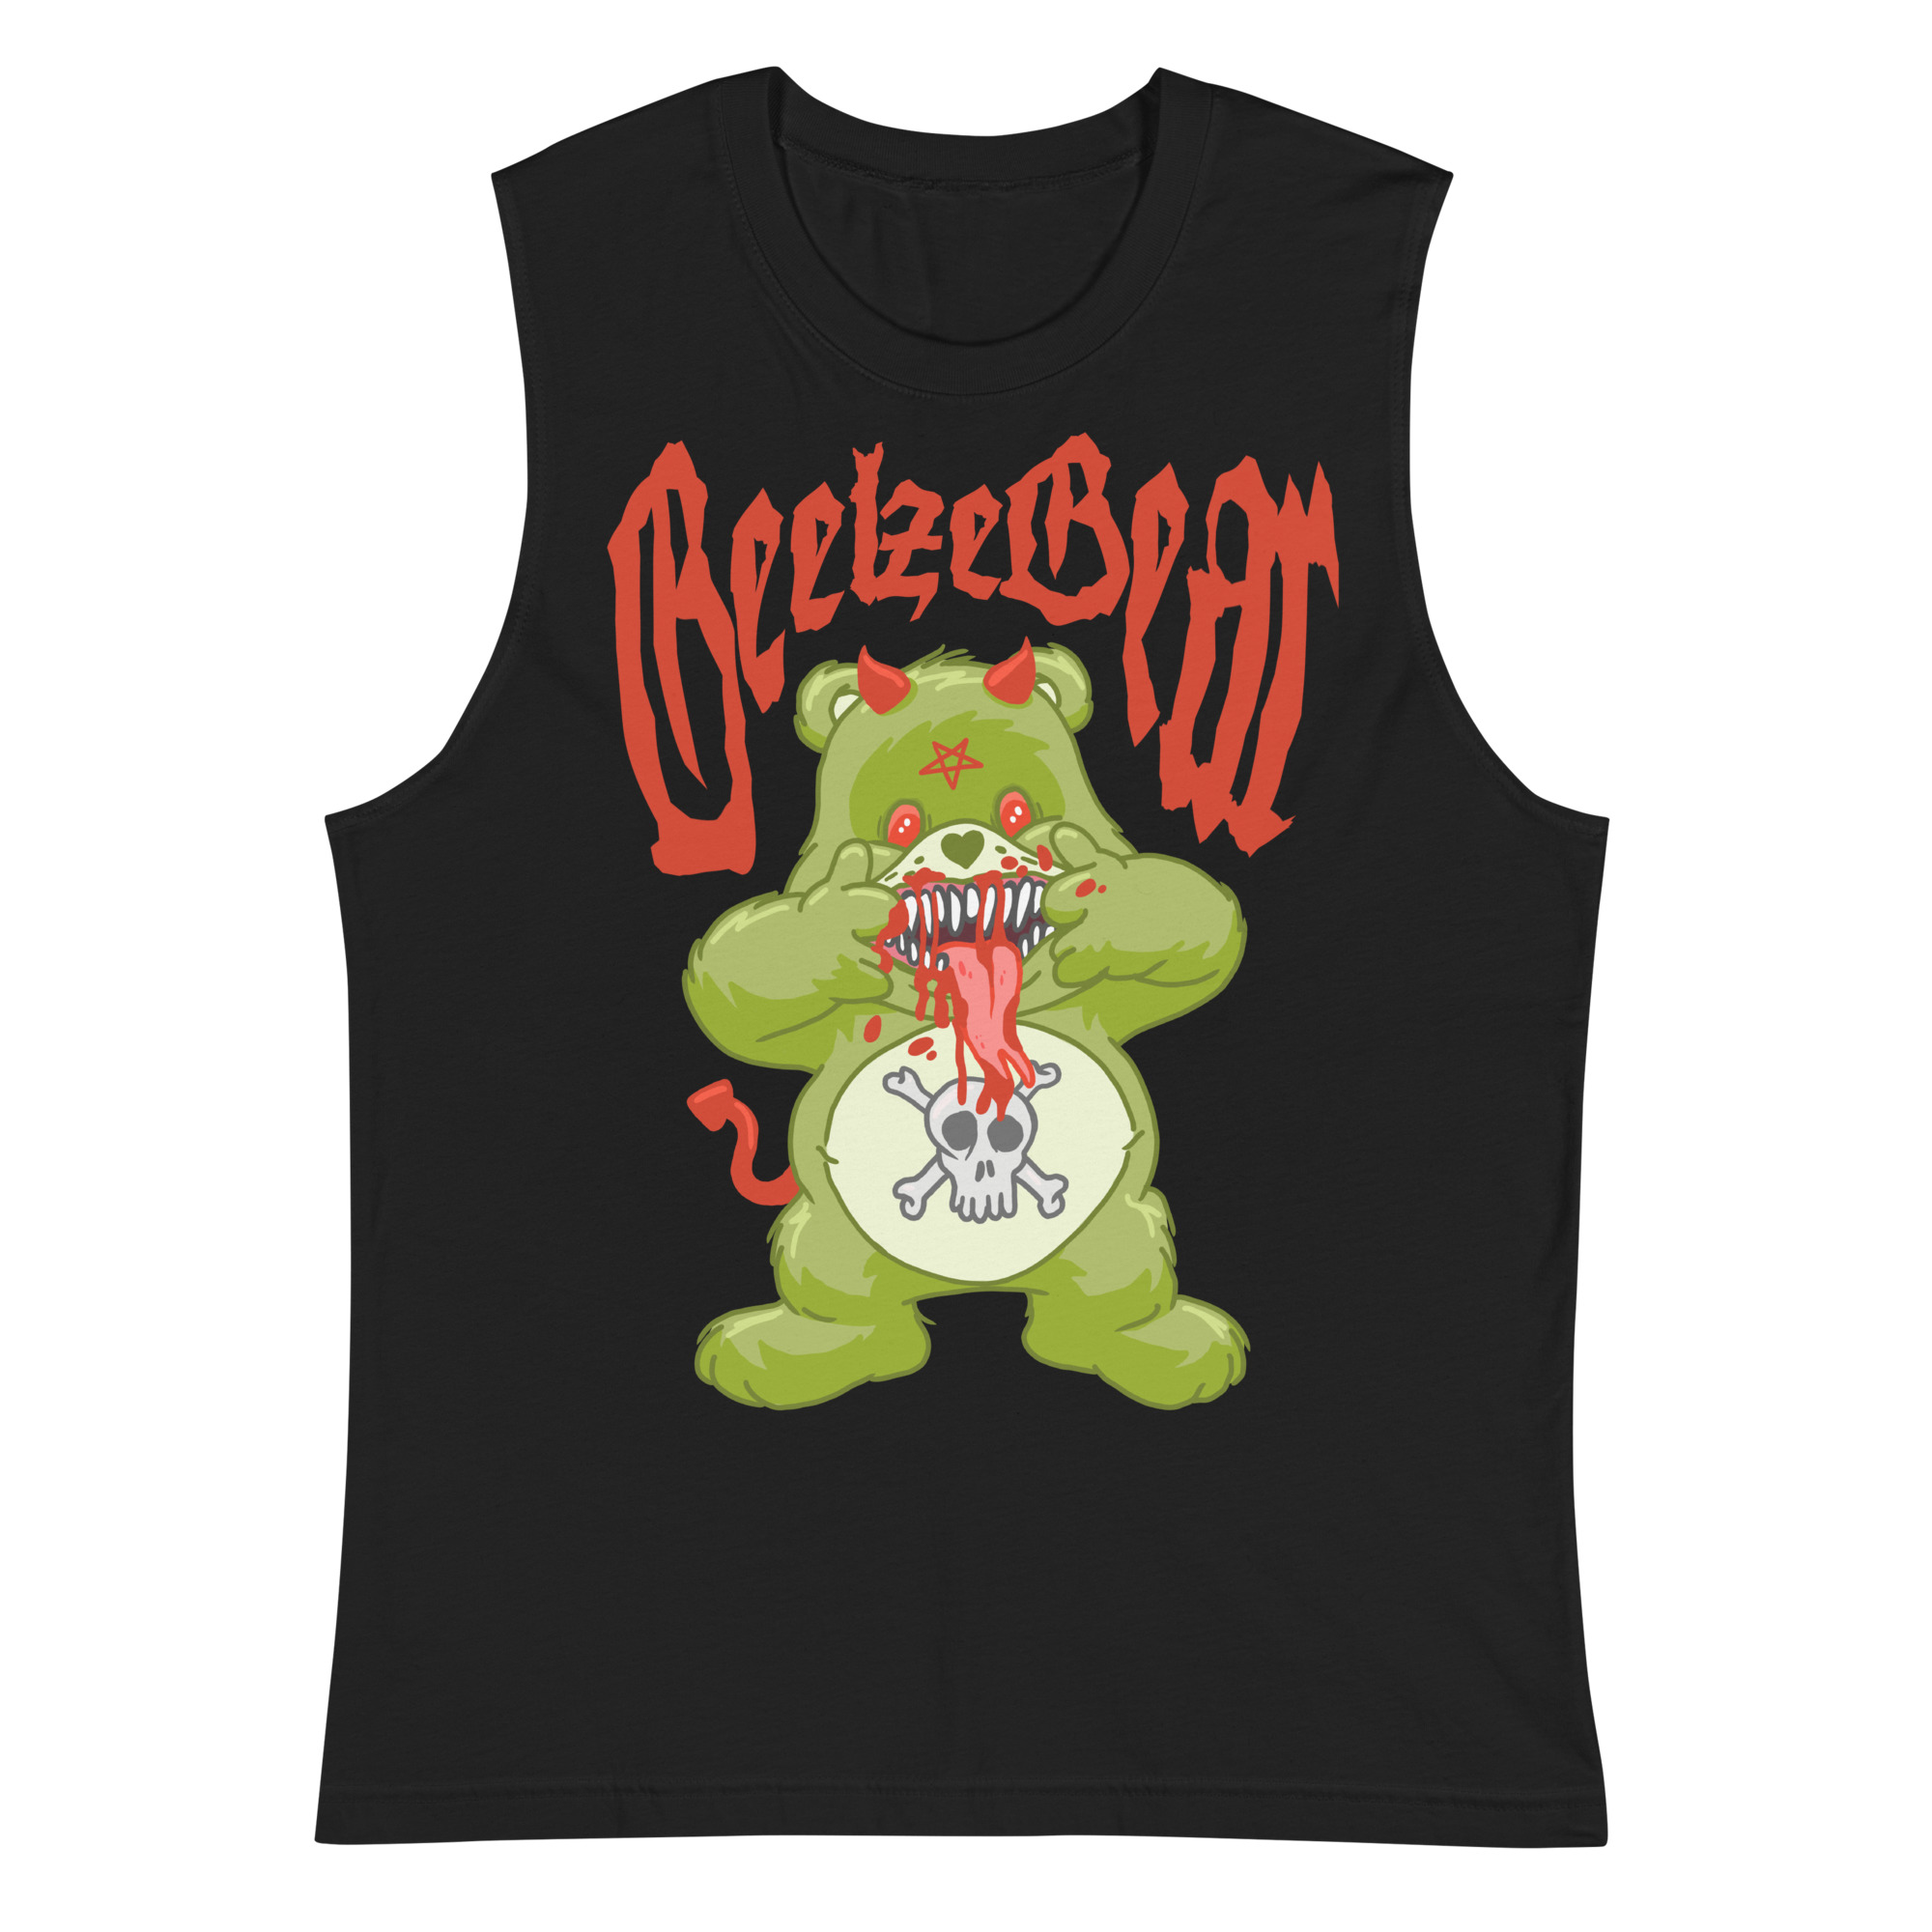 Featured image for “BeelzeBear - Muscle Shirt”